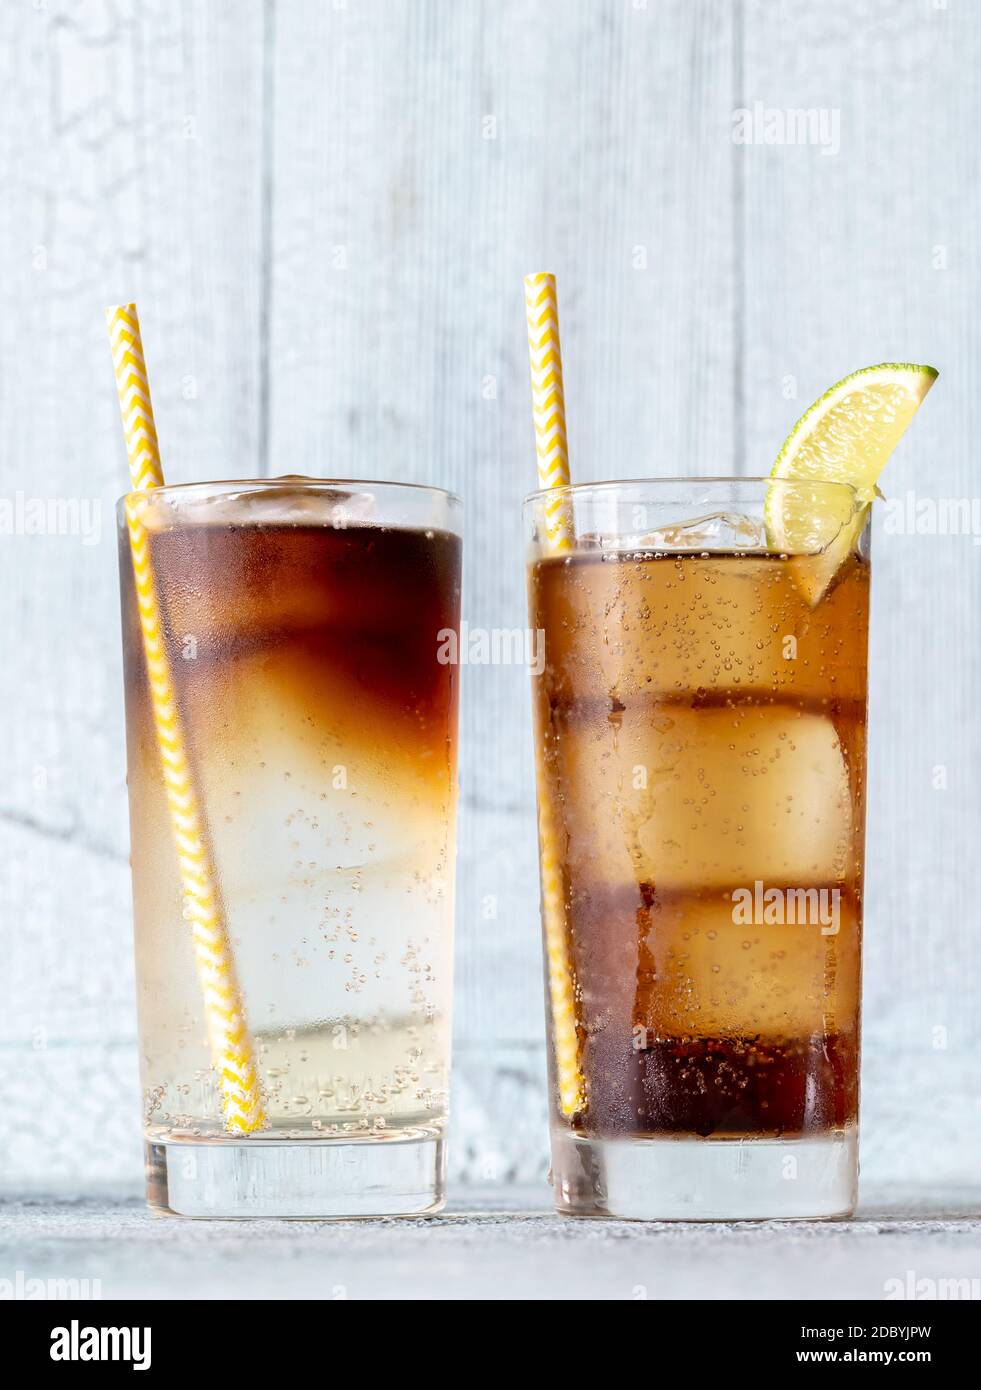 Glasses of Dark 'n' Stormy and Cuba libre cocktails Stock Photo